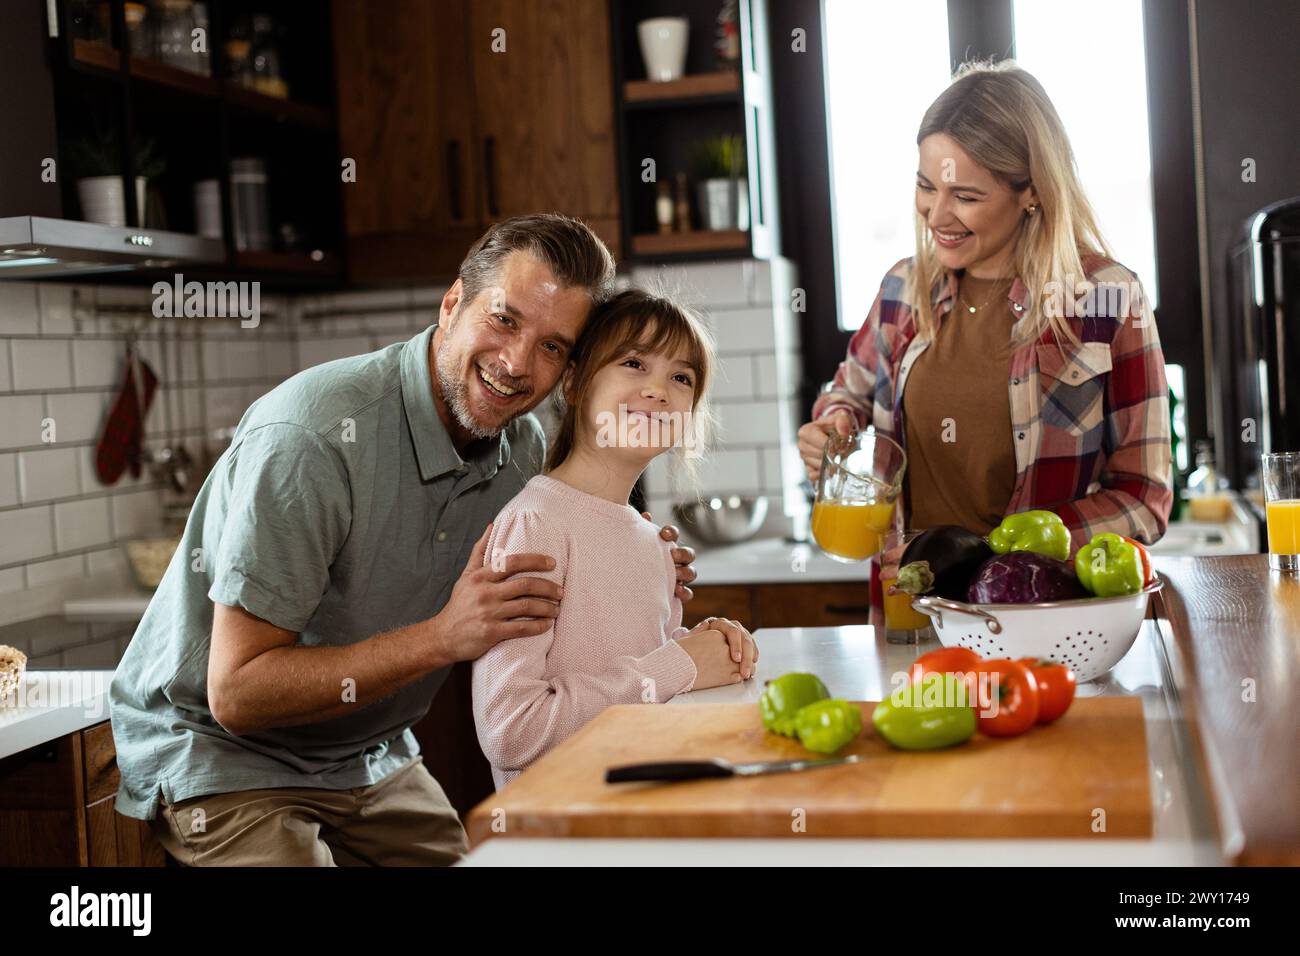 Young family chatting and preparing food around a bustling kitchen counter filled with fresh ingredients and cooking utensils Stock Photo